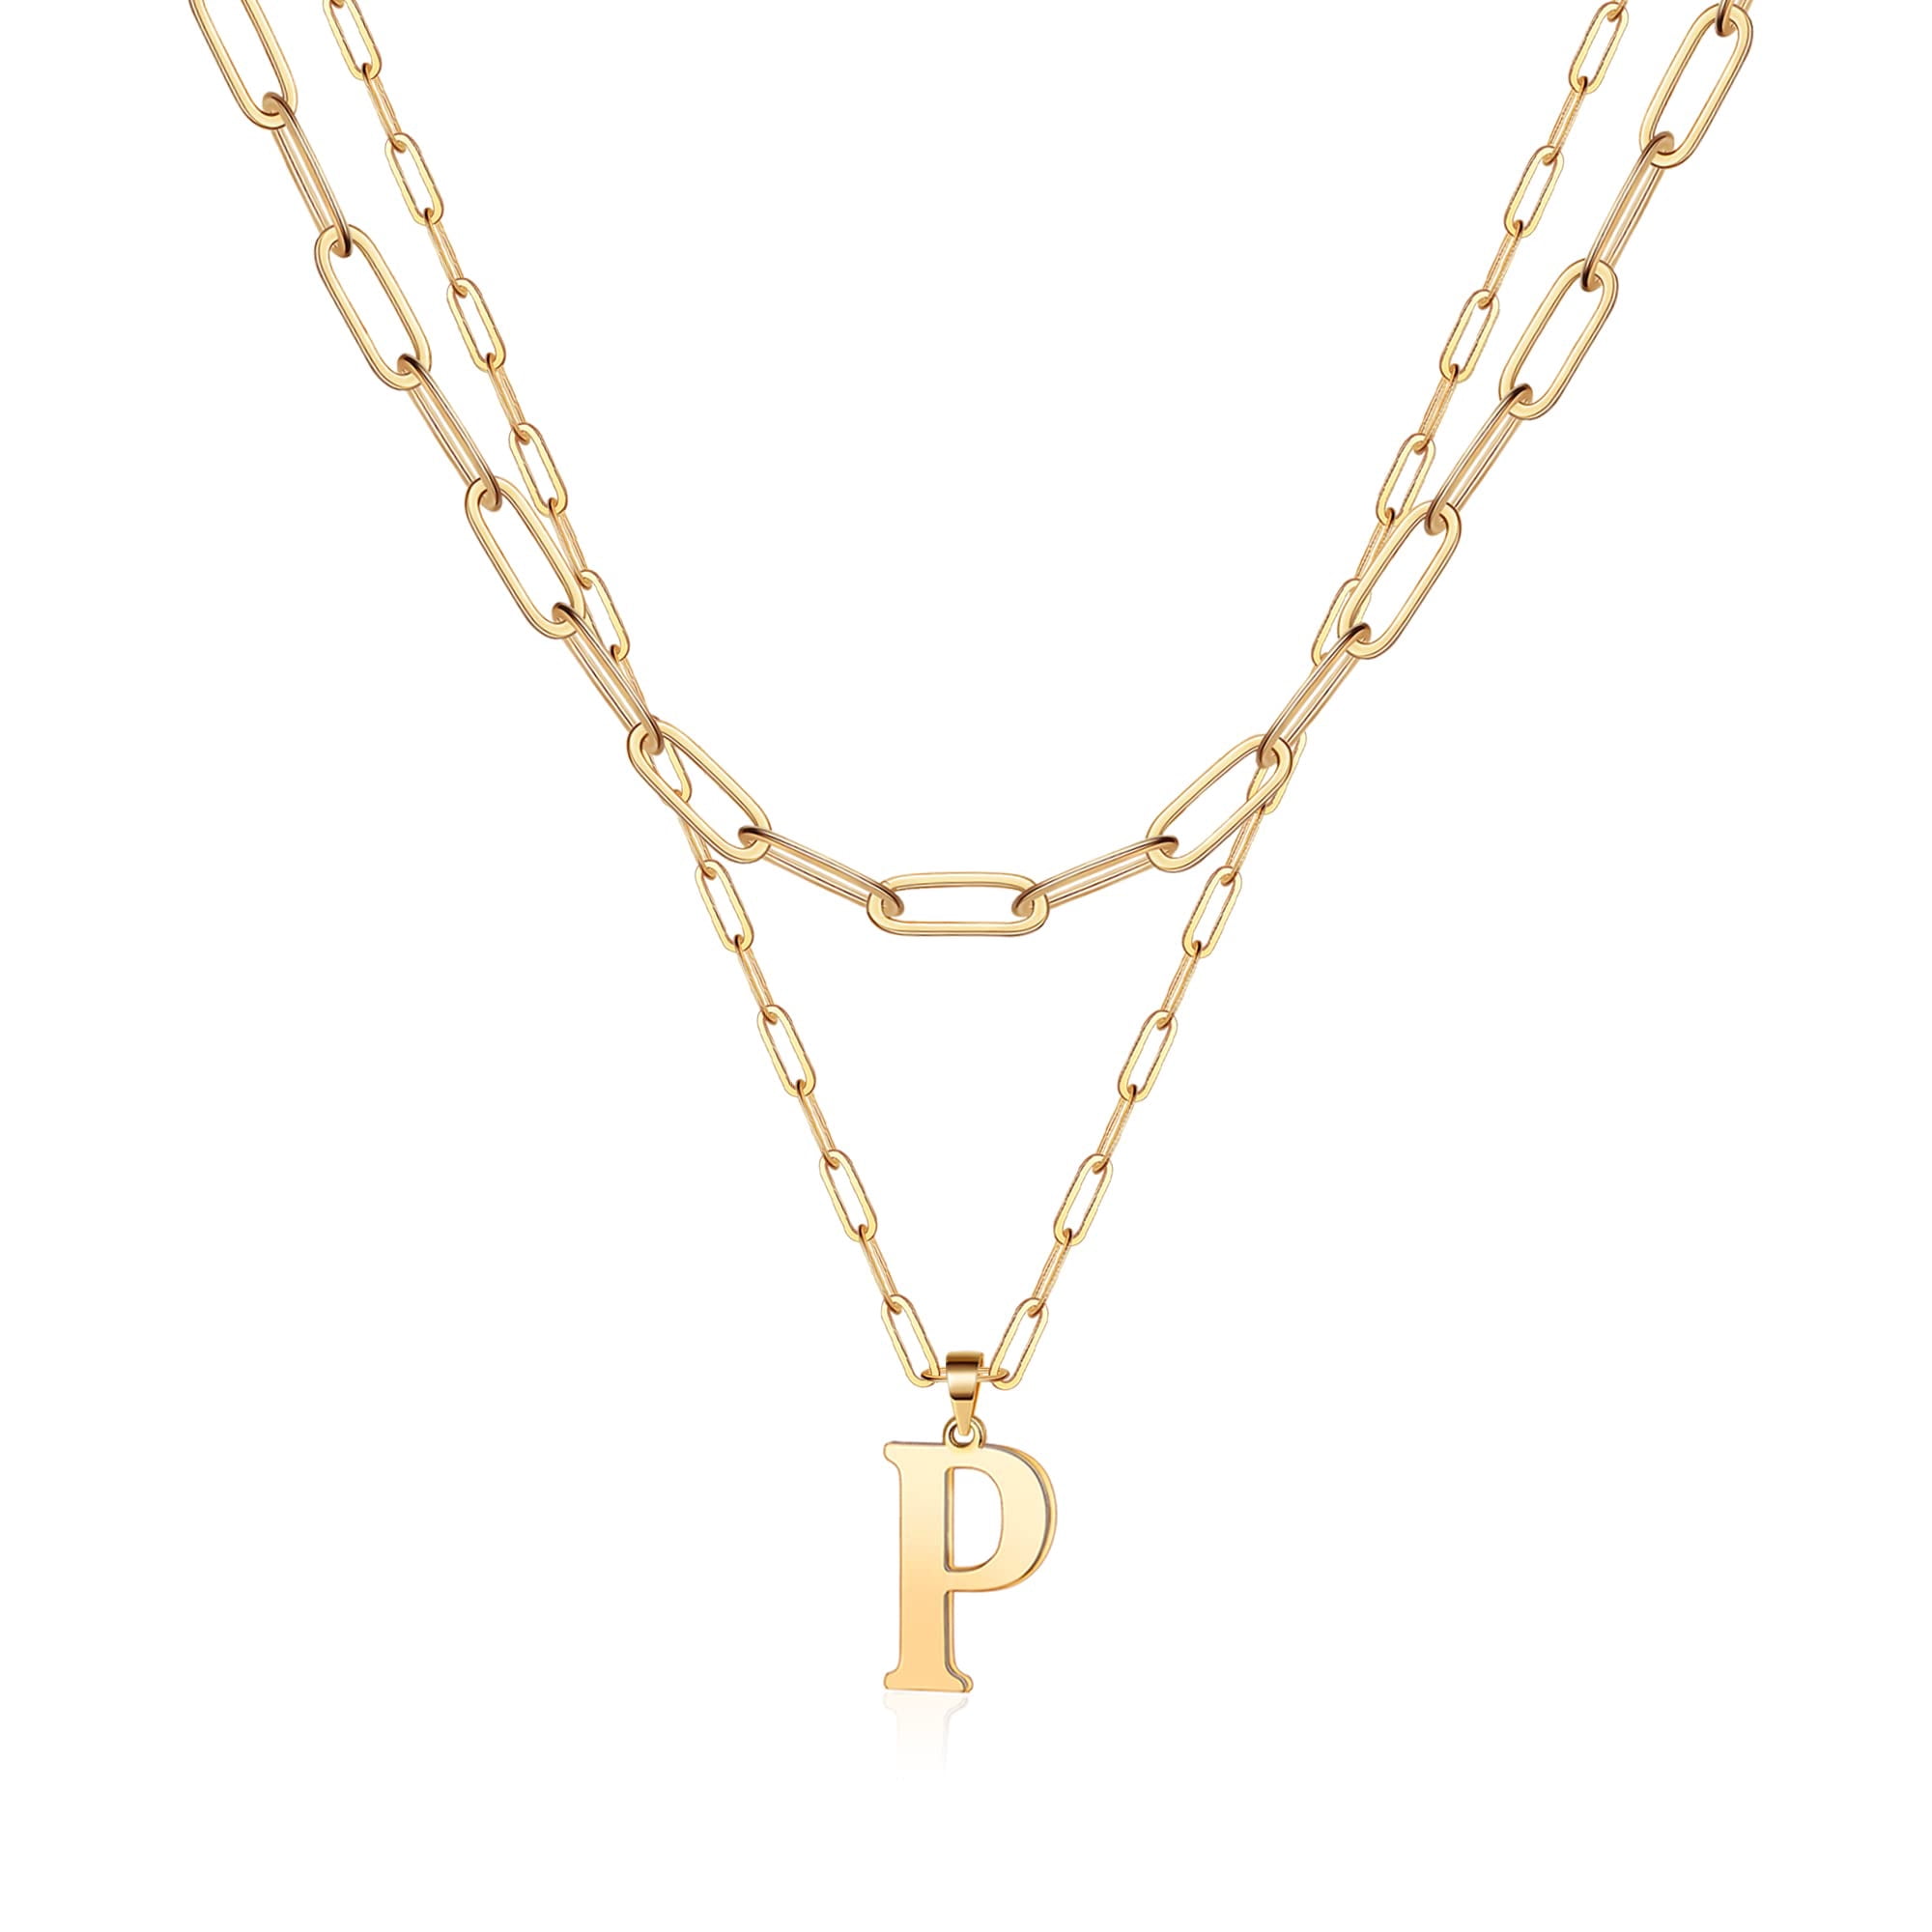 Dainty Layered Initial Necklaces for Women Trendy, GoldPaperclip